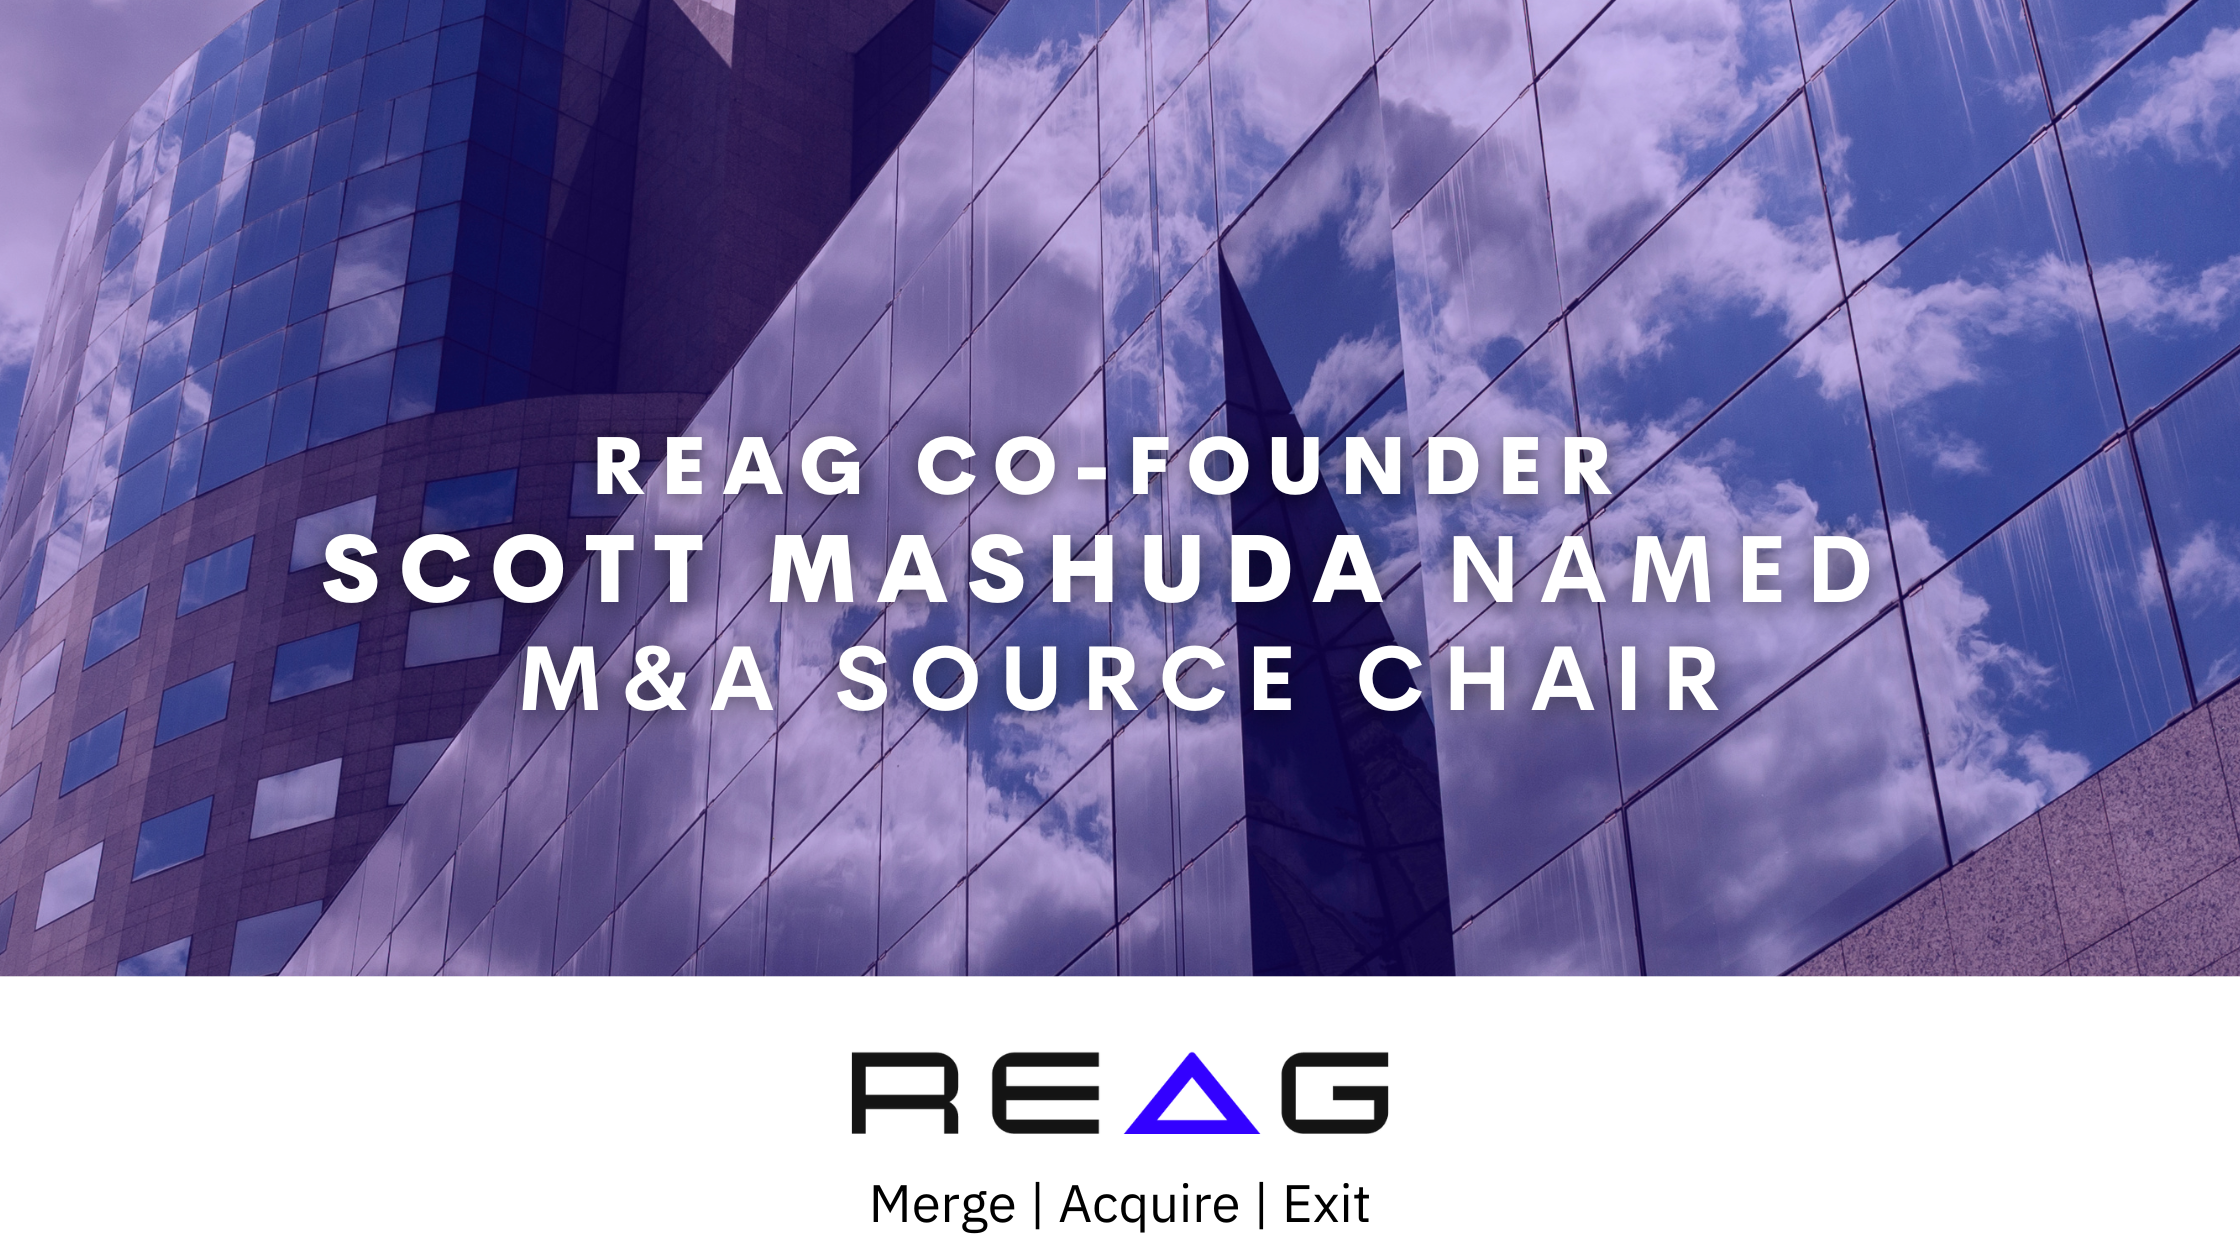 Reag co-founder Scott Mashada was named mba source chair.